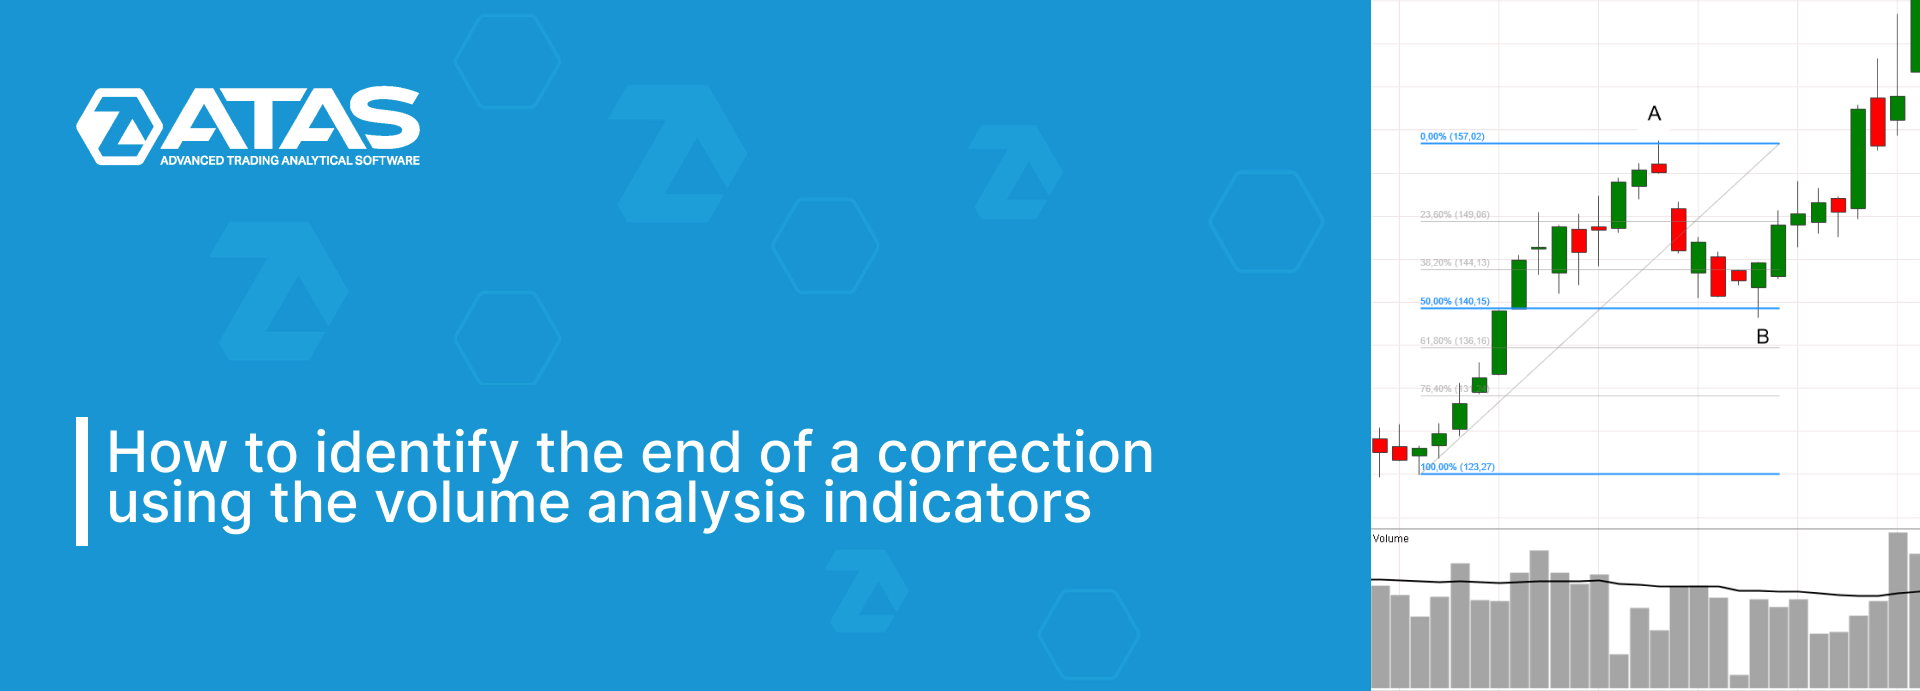 How to identify the end of a correction using the volume analysis indicators